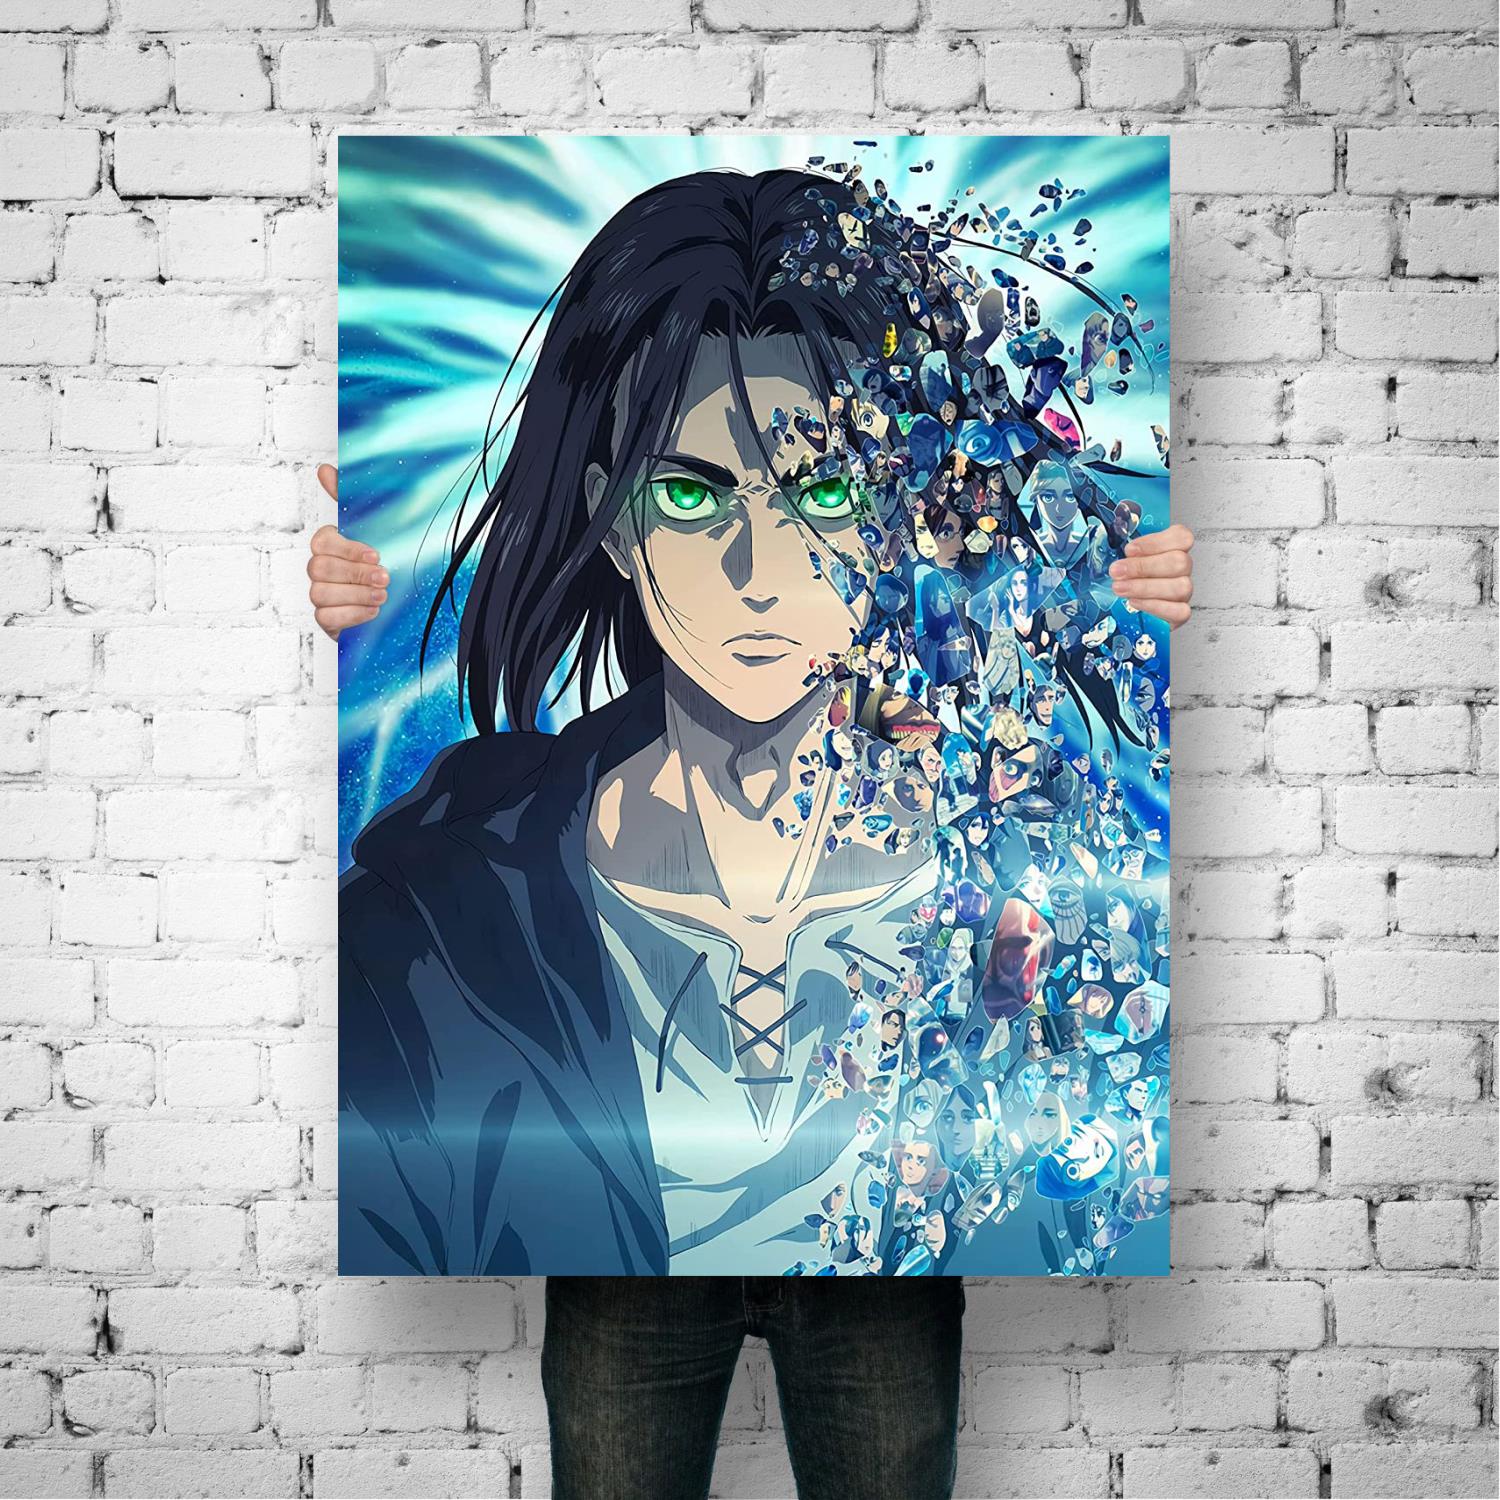 manga plus attack on titan poster Decorative Painting Canvas 24x36 Poster Wall Art Living Room Posters 2 - Attack On Titan Plush